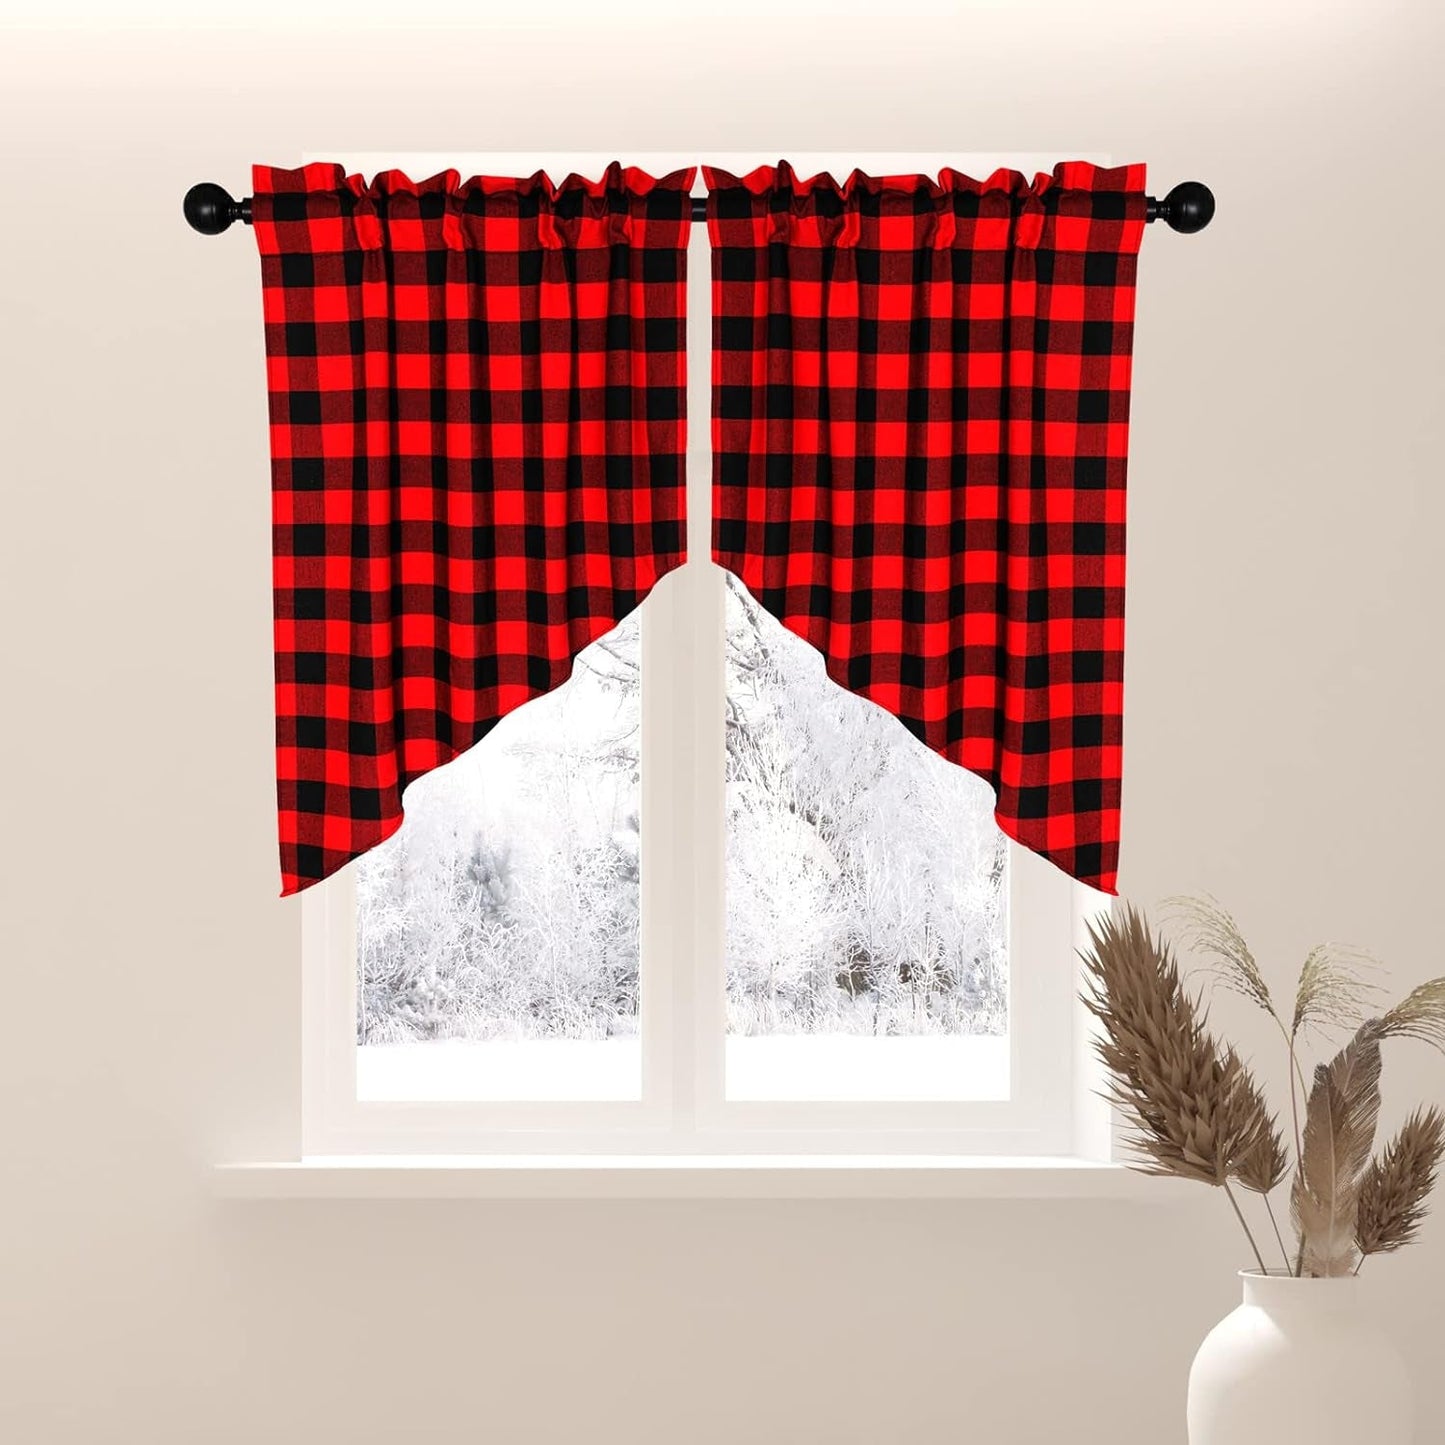 2 Pcs Buffalo Check Swag Curtains 36 Inches Length Rod Pocket Half Small Cafe Window Curtains Farmhouse Plaid Gingham Swag Valance Kitchen Curtains, Black/White, 28X36 Inches